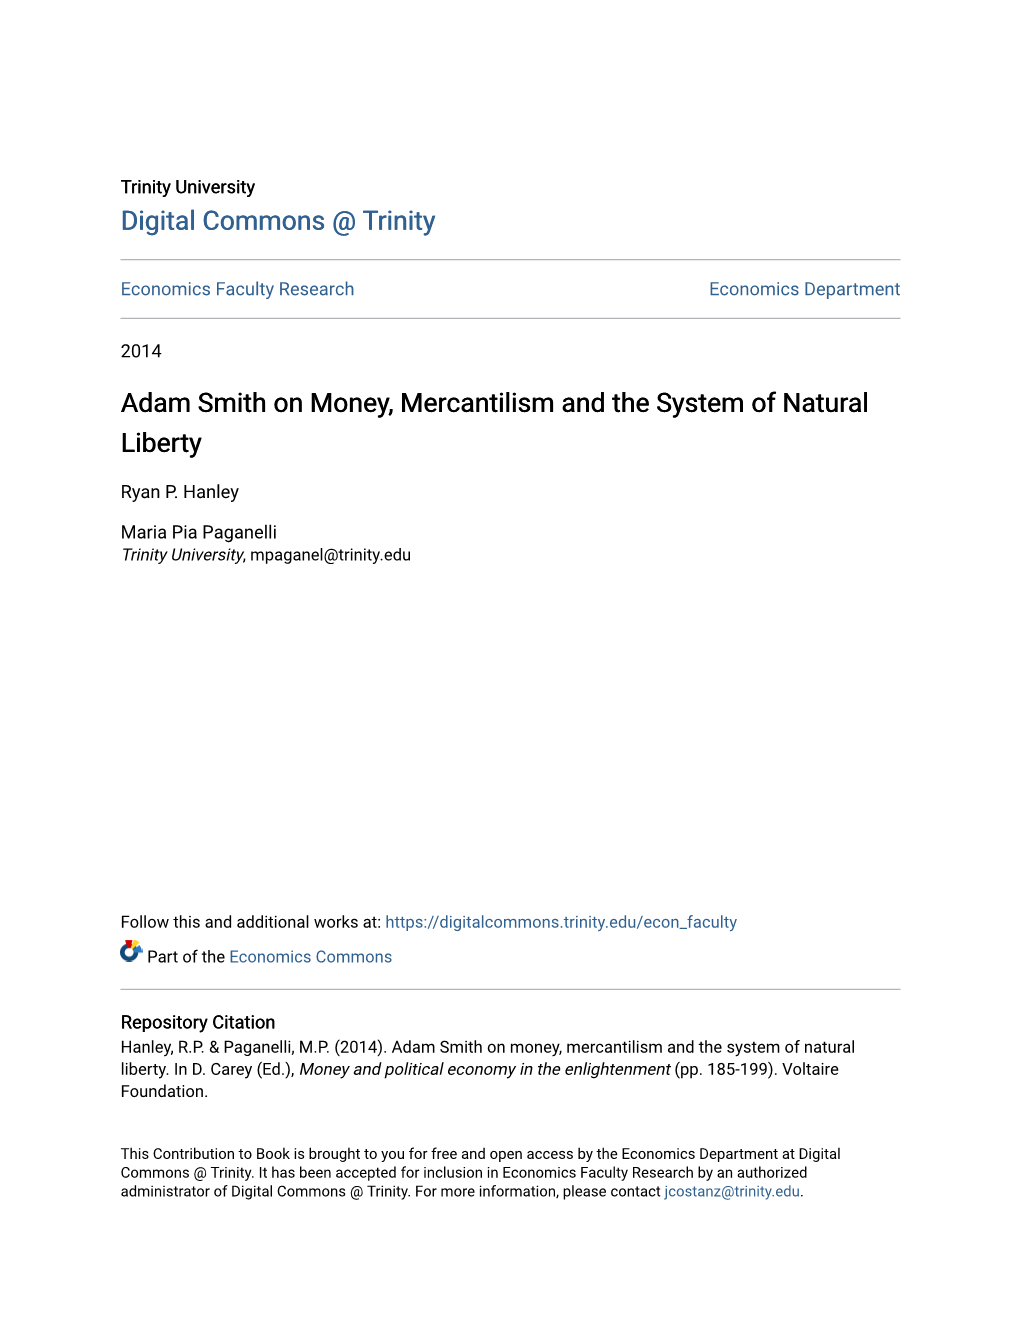 Adam Smith on Money, Mercantilism and the System of Natural Liberty